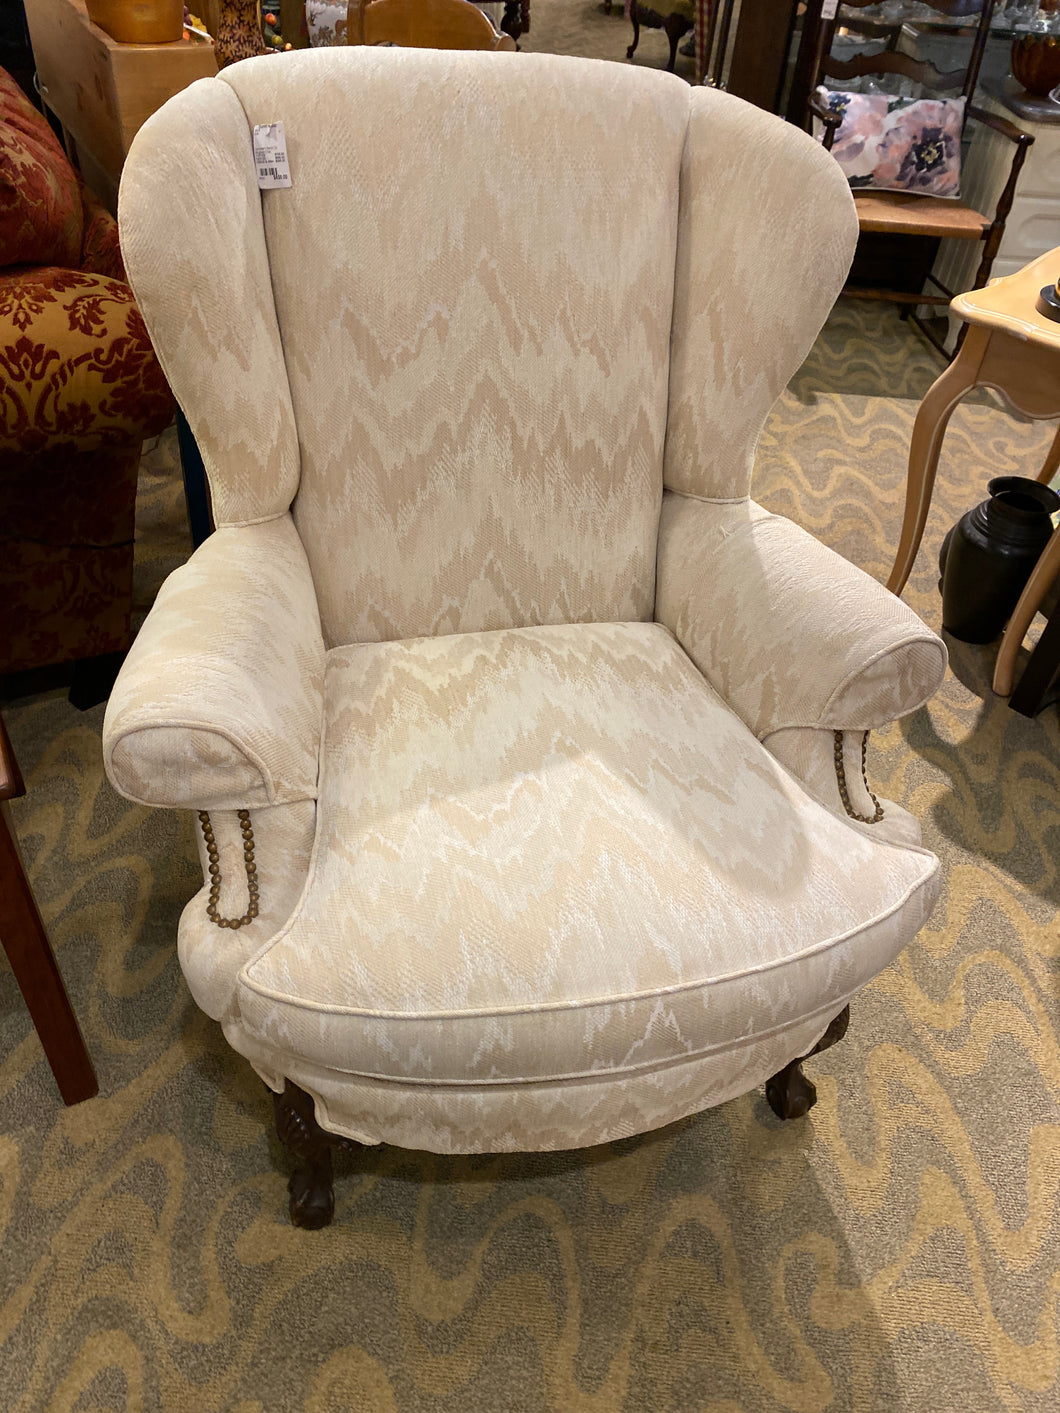 Upholster's Bench Co. Wingback Chair